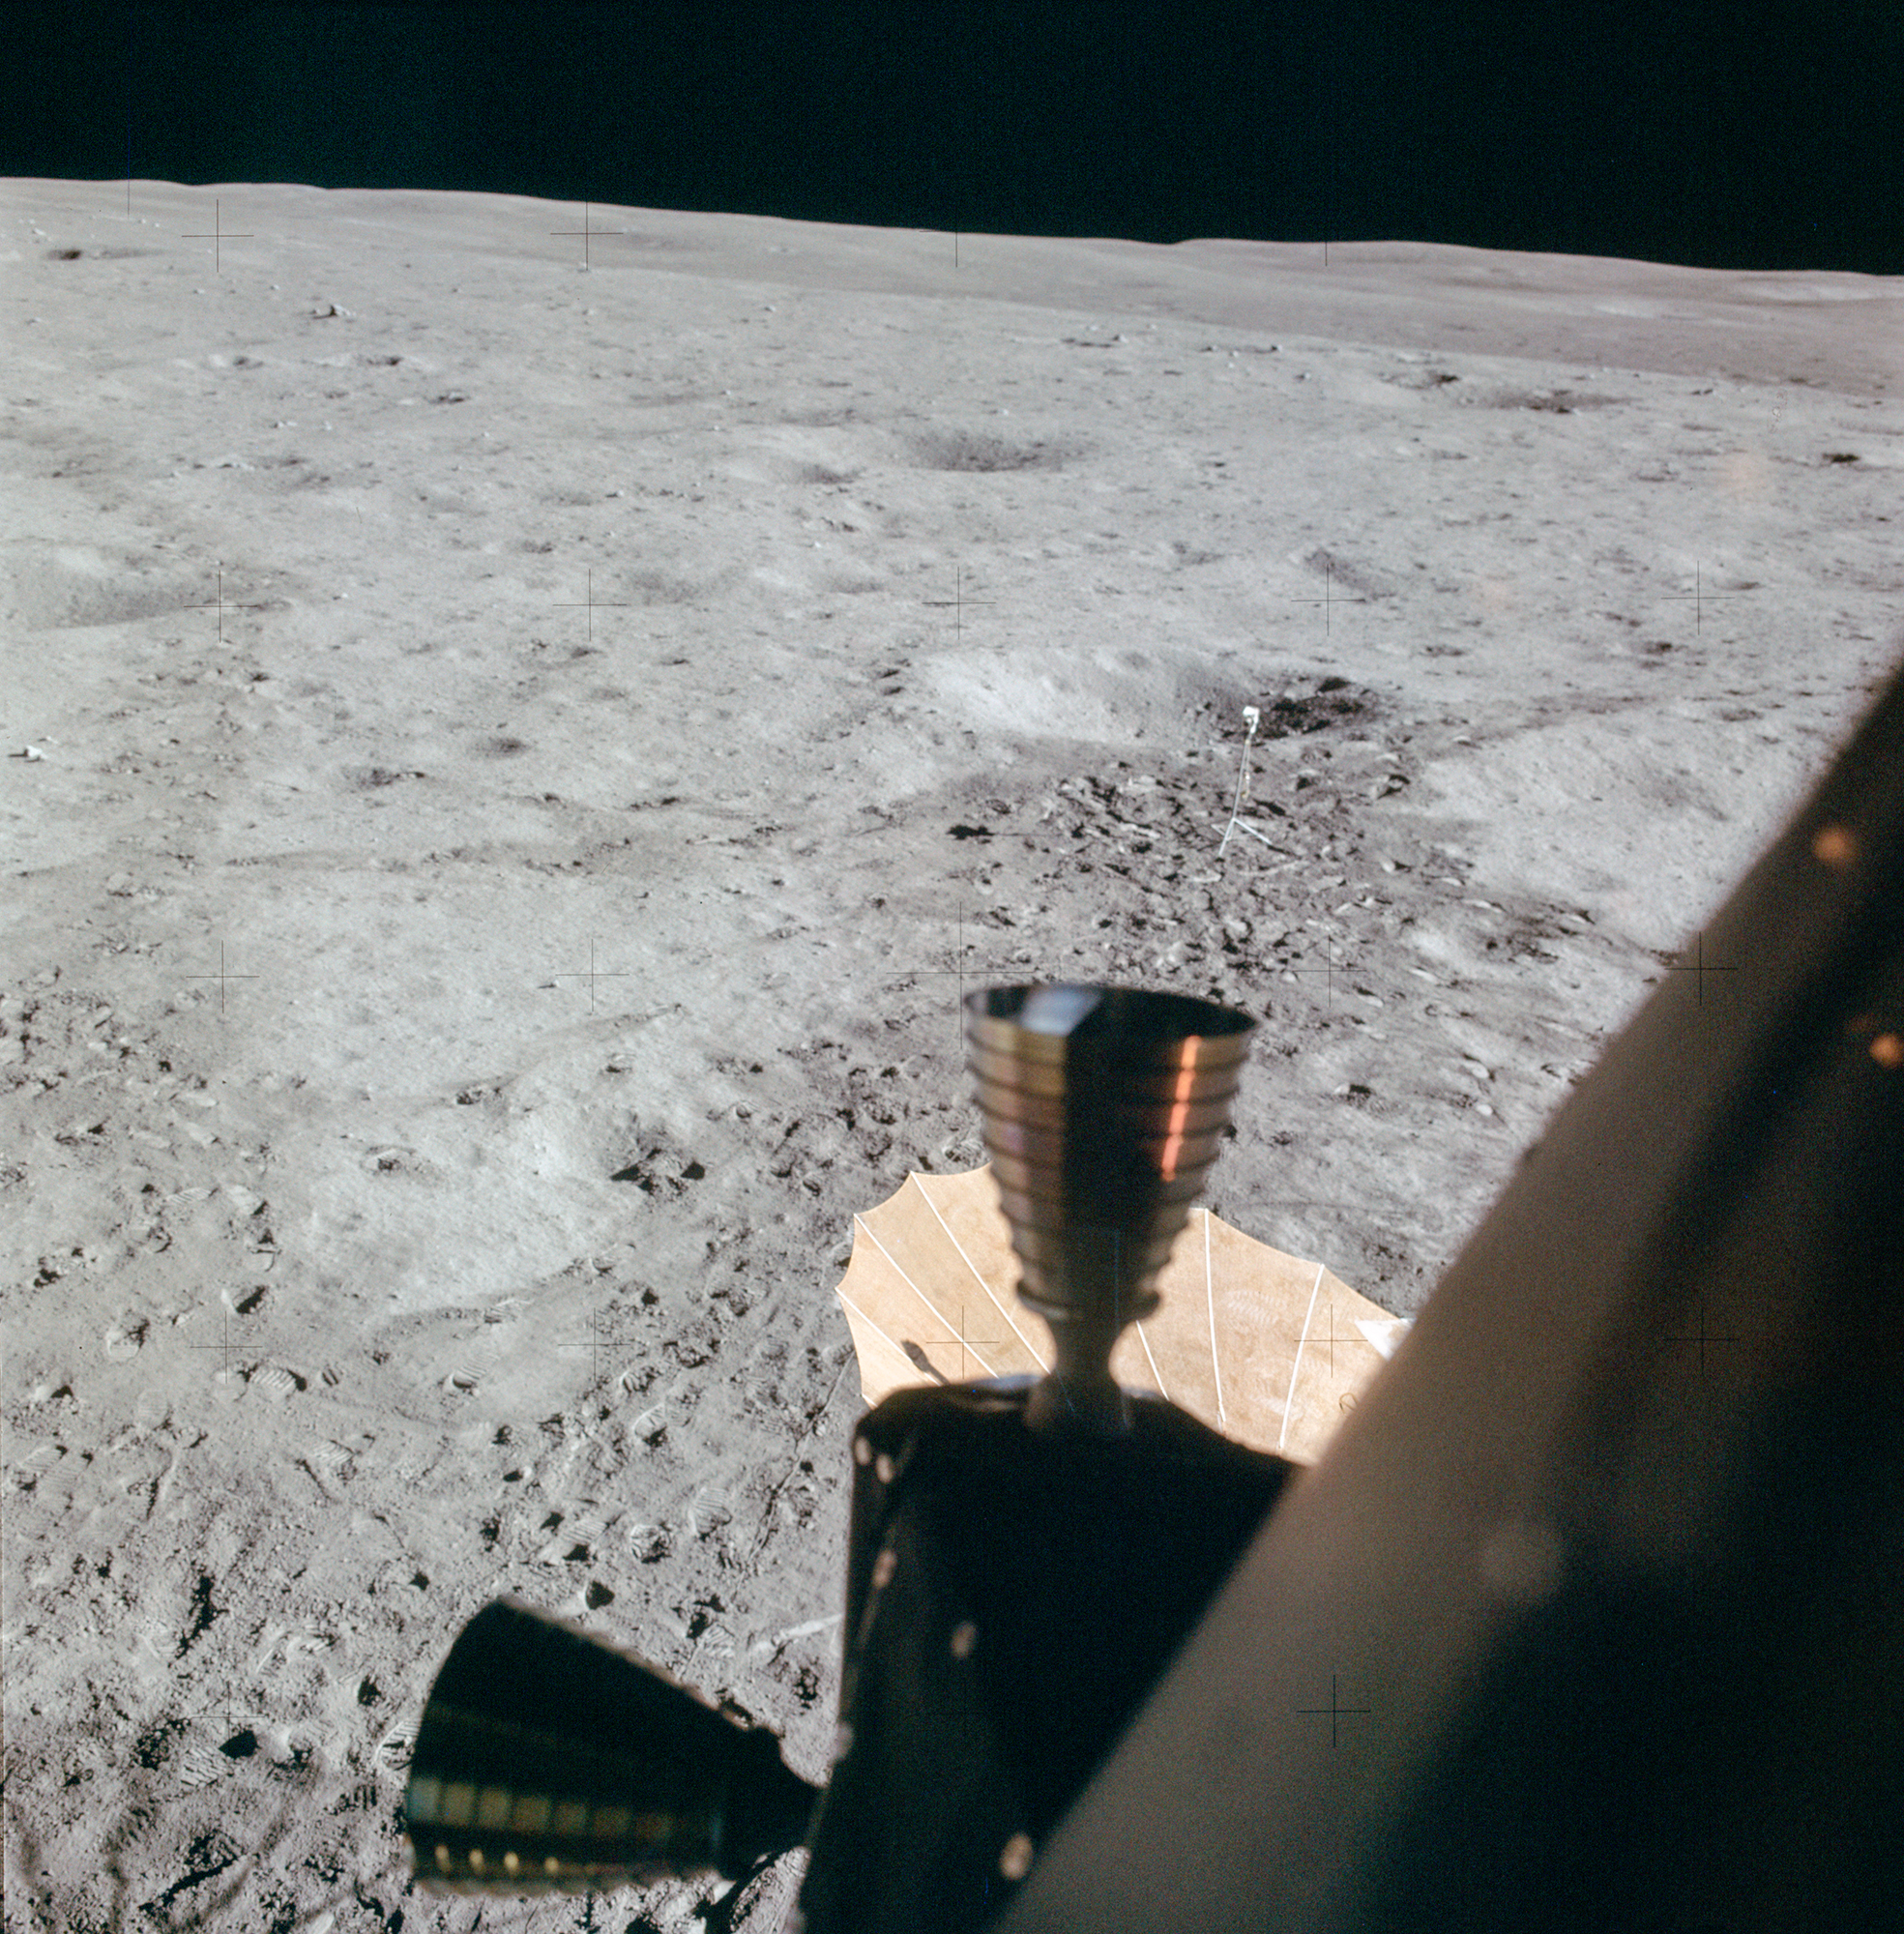 apollo-14-on-moon-thrusters-toward-the-tv-camera-and-the-s-band-antenna.jpg